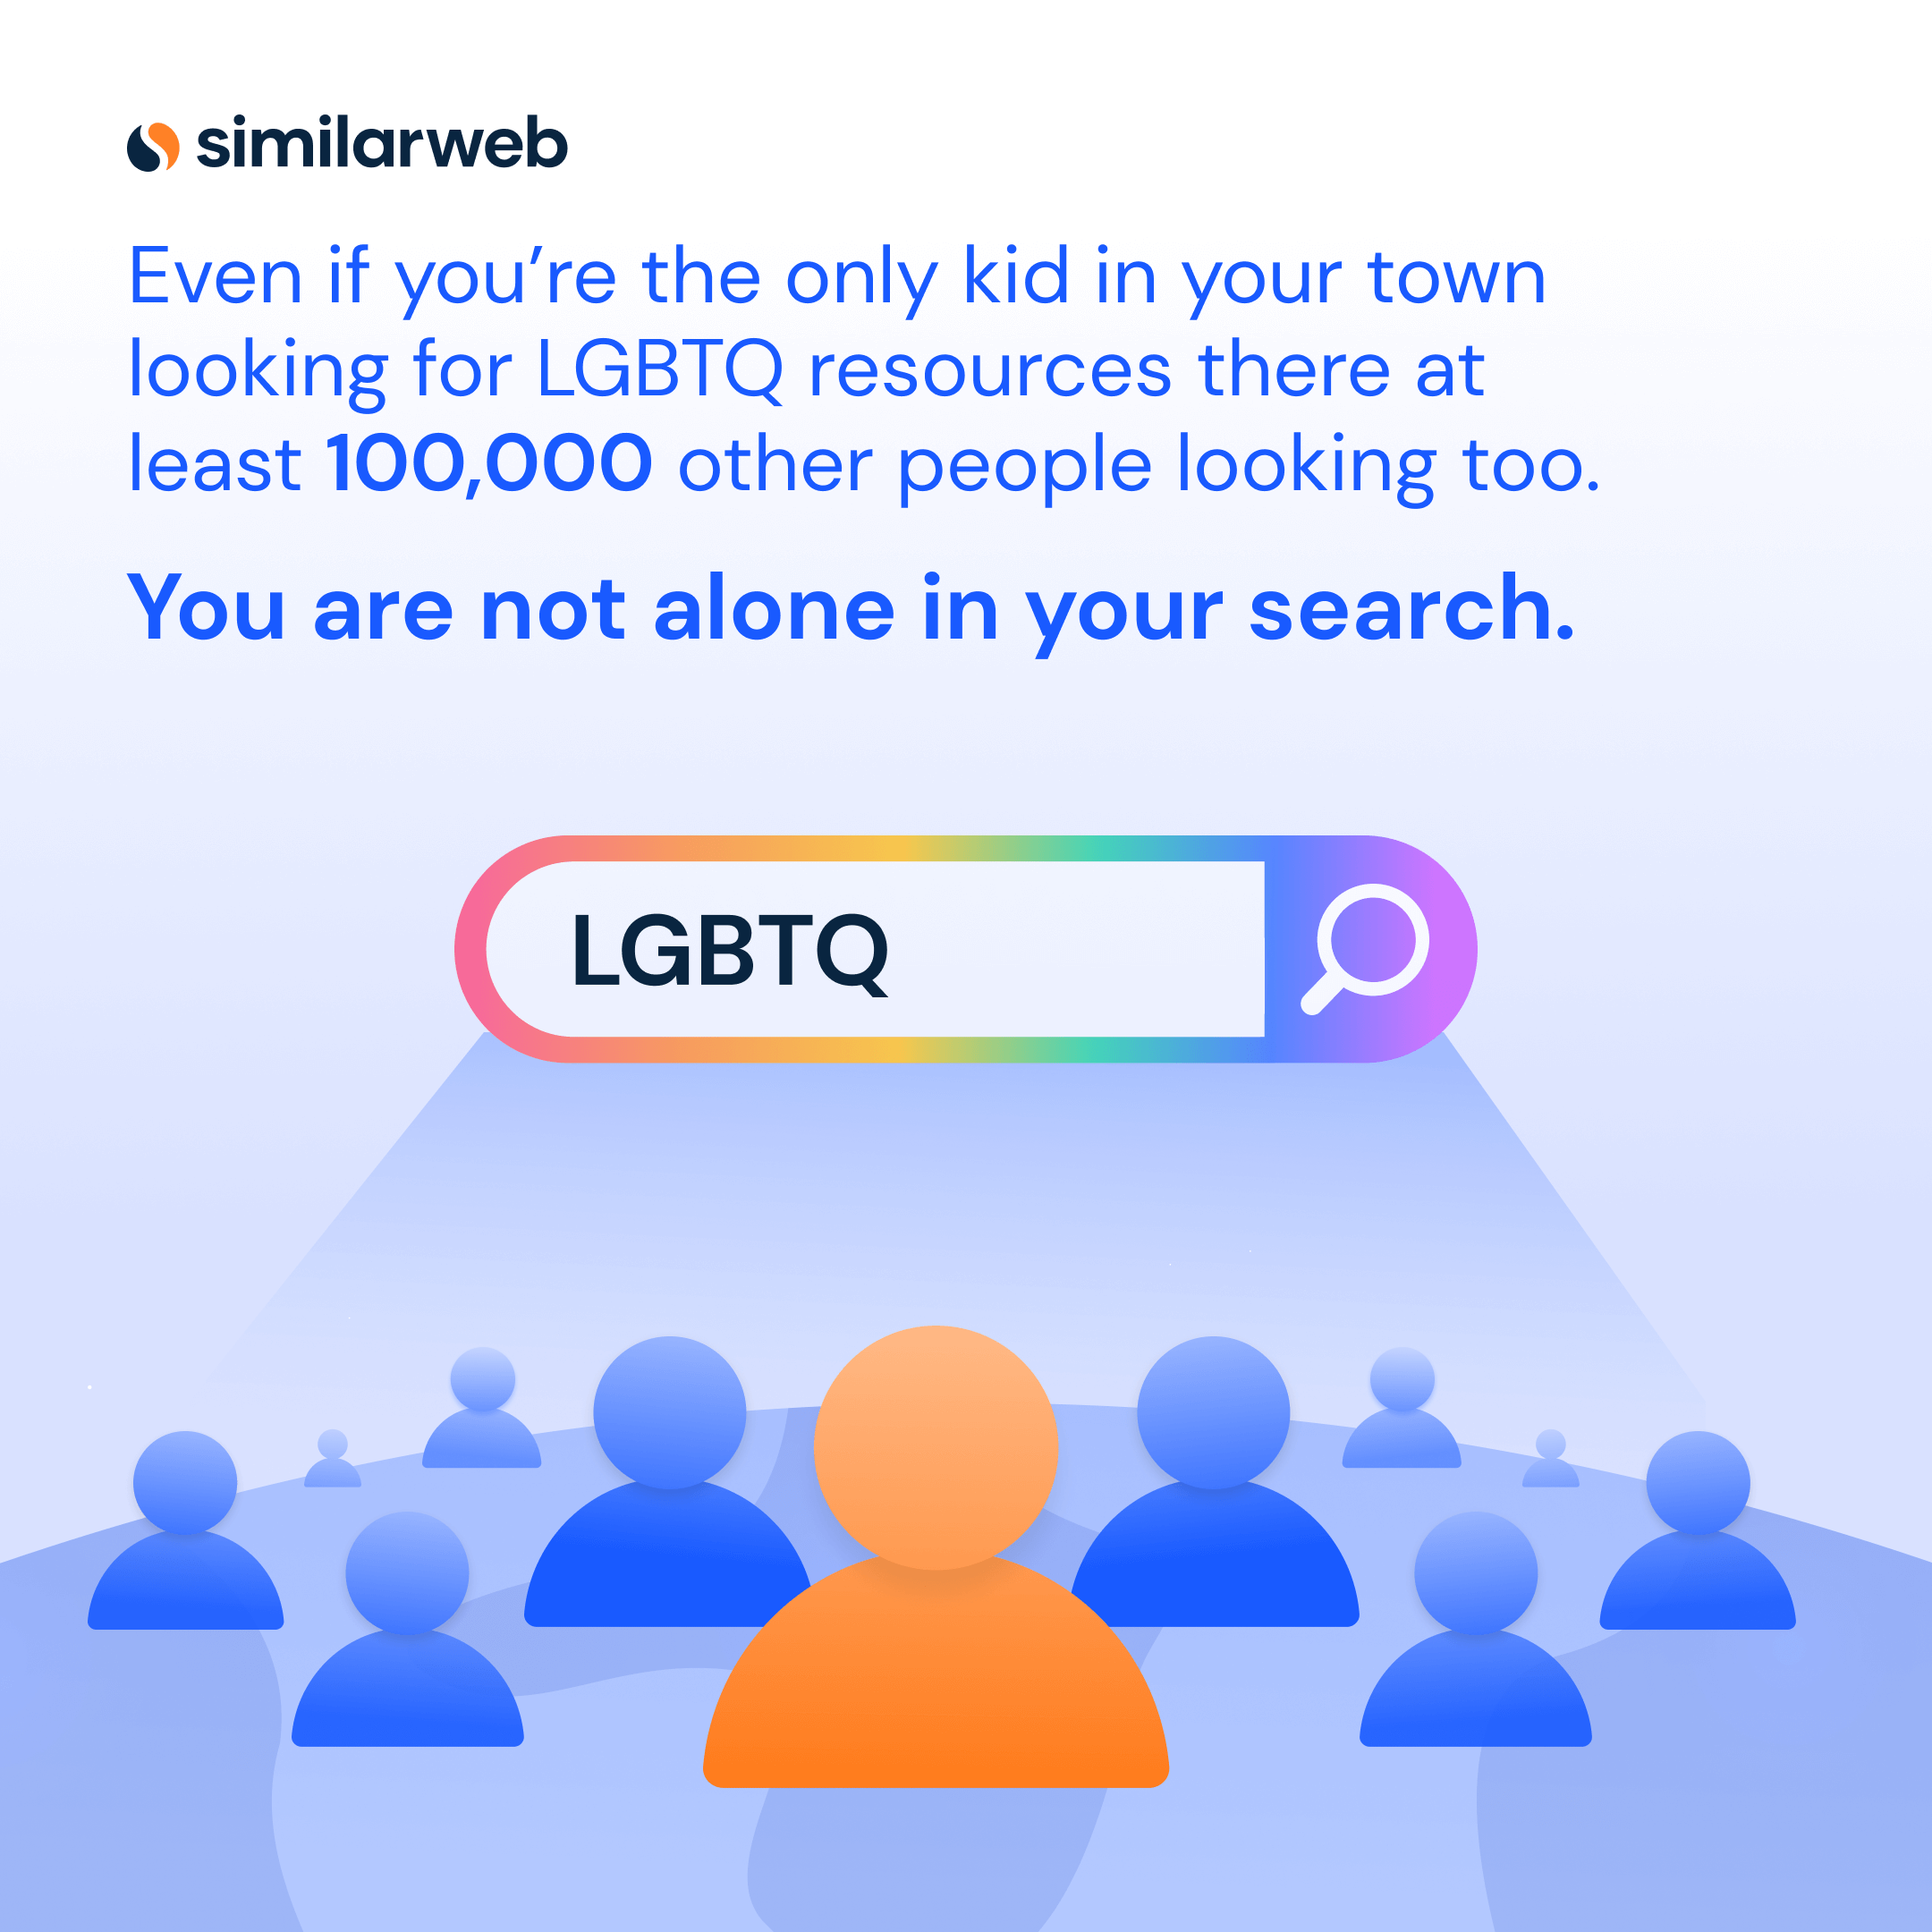 Even if you’re the only kid in your town looking for LGBTQ resources there at least 100,000 other people looking too.